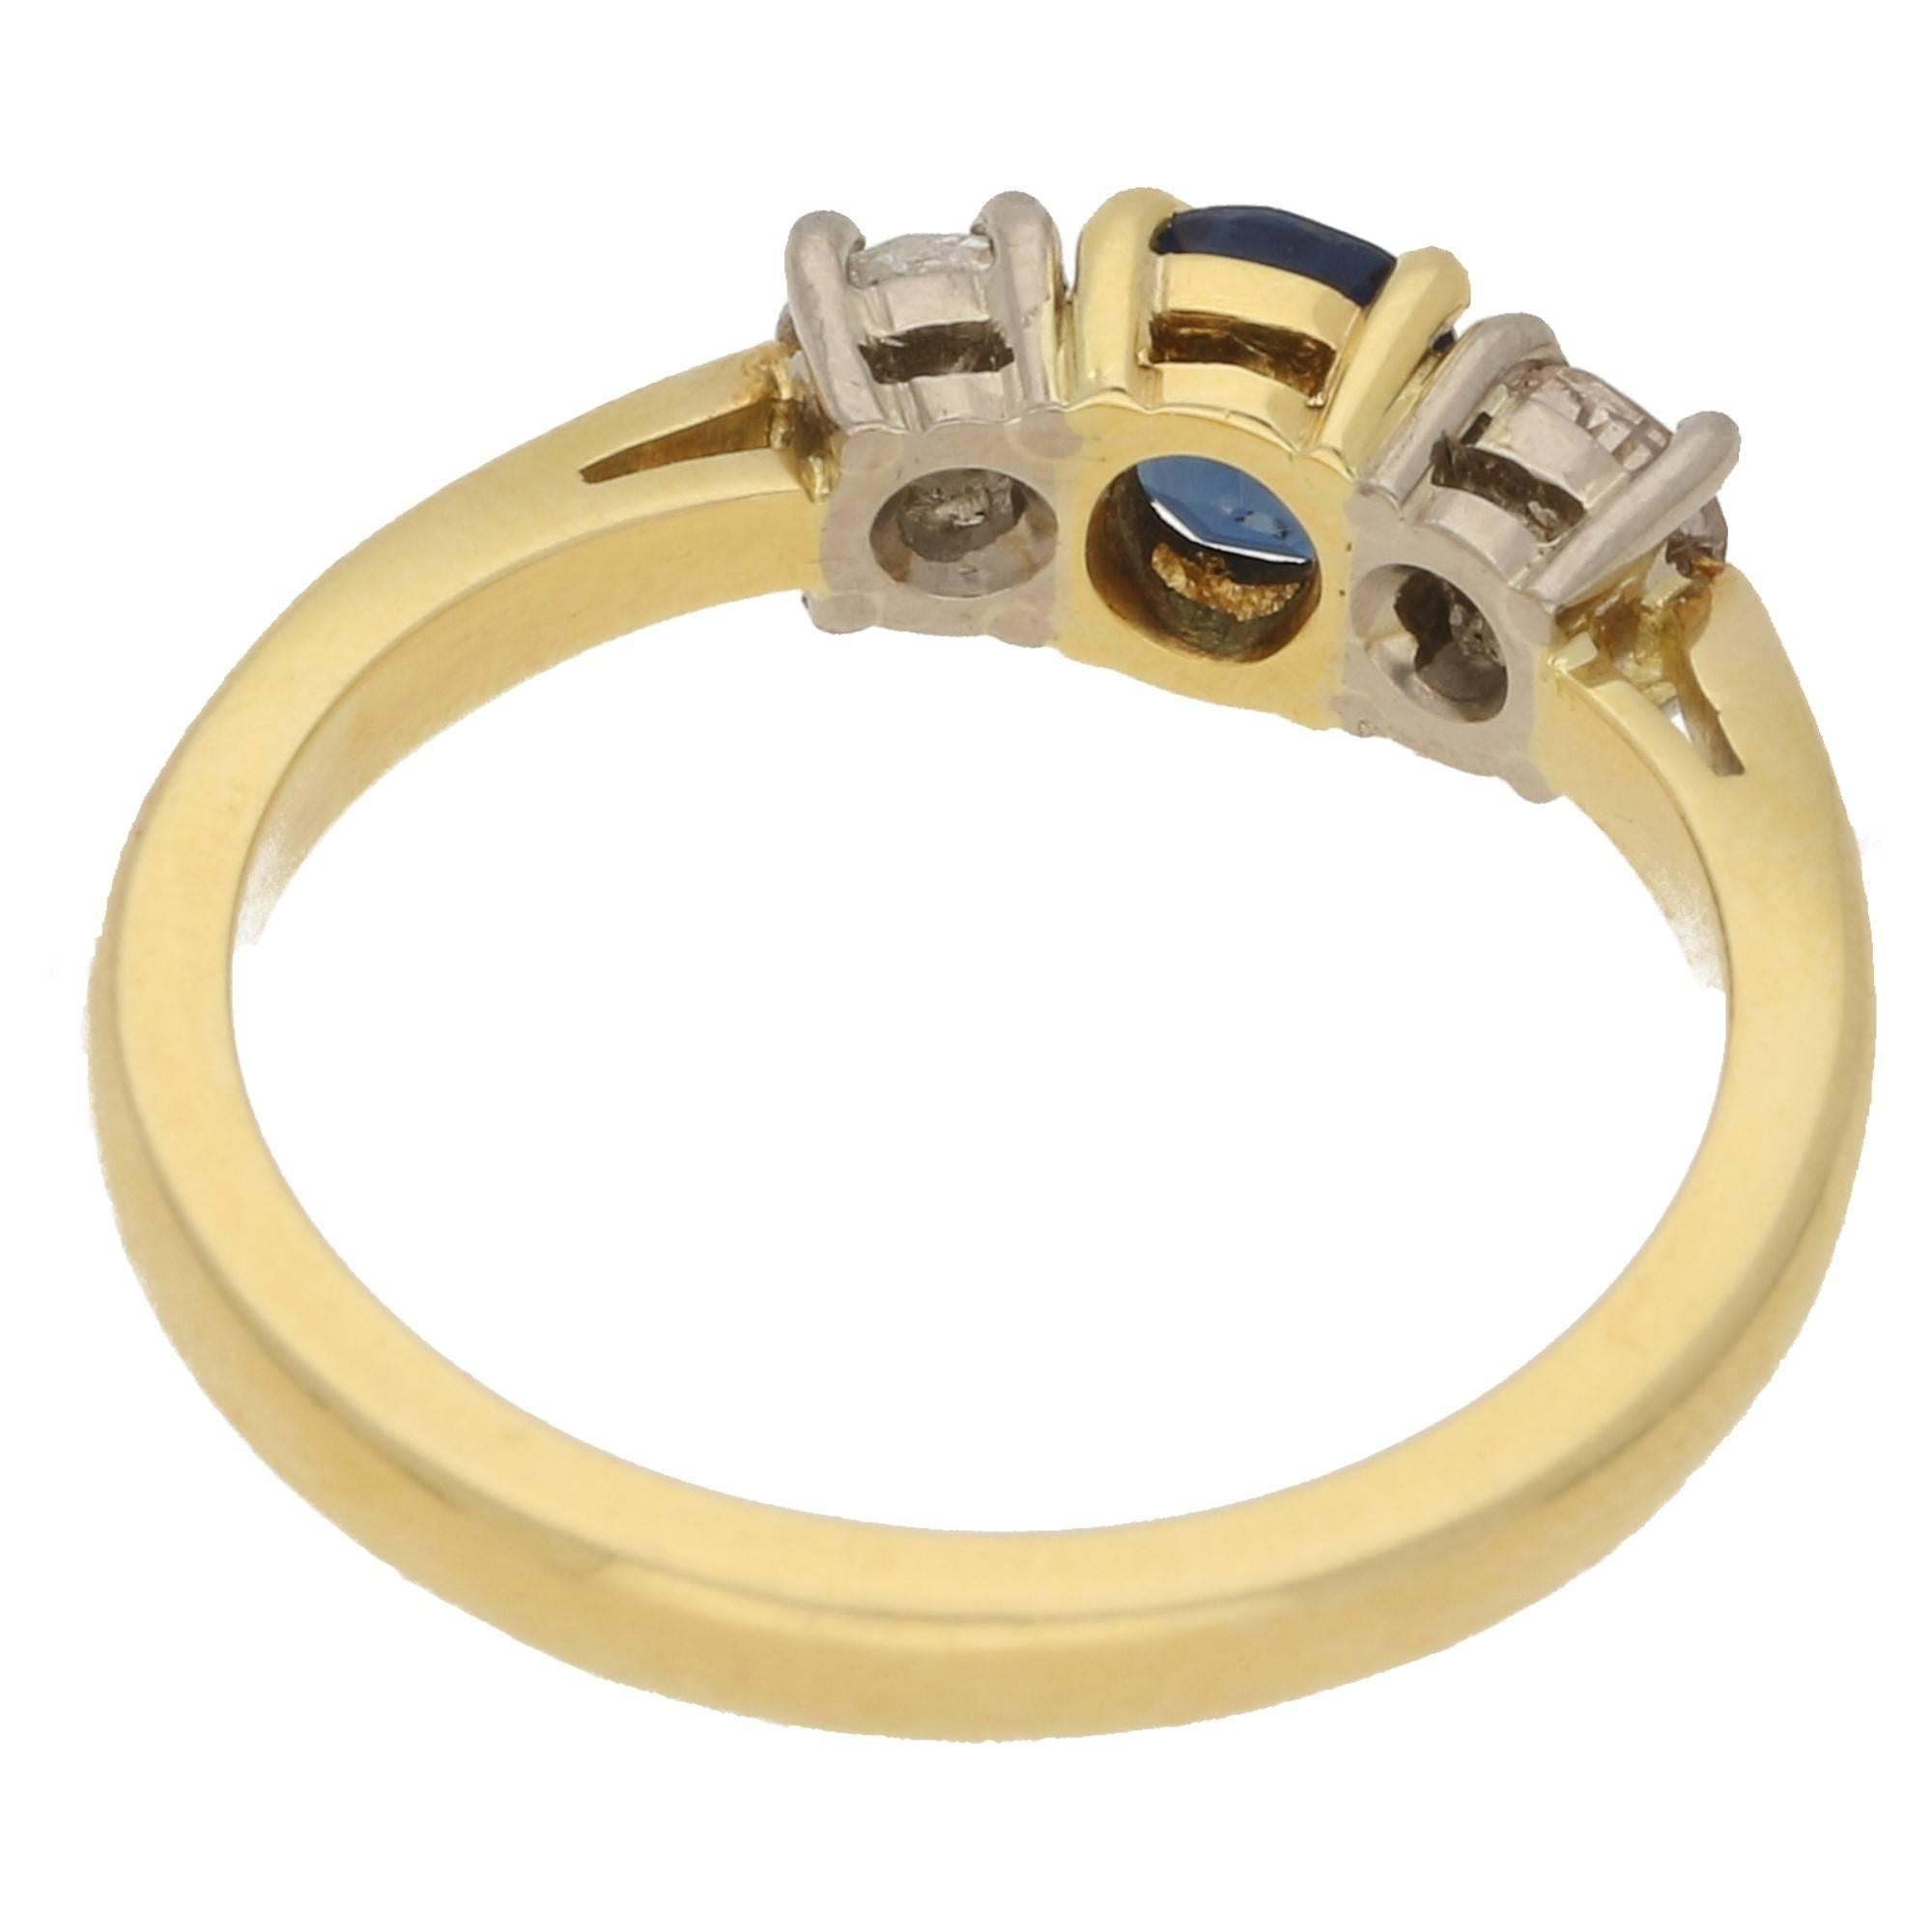 A vintage sapphire and diamond three stone ring, the central sapphire measuring an estimated 0.52cts. The shoulder diamonds are approximately 0.4cts in total. On a yellow gold hallmarked band. Ring size is a UK M 1/2 but this can be easily resized.